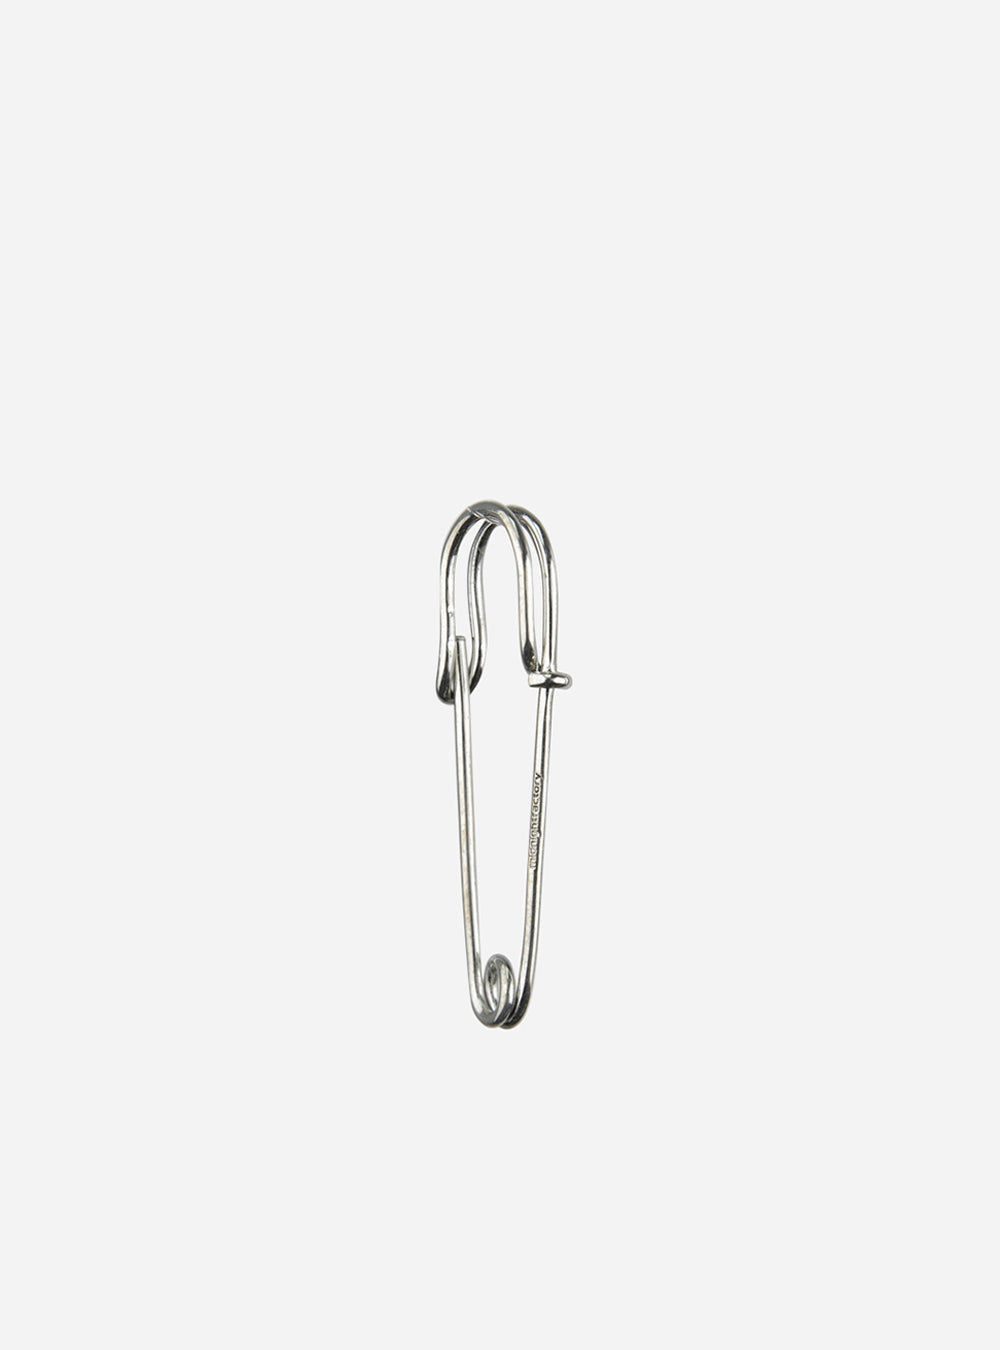 a small MIDNIGHTFACTORY silver Safety-pin earring on a white background.